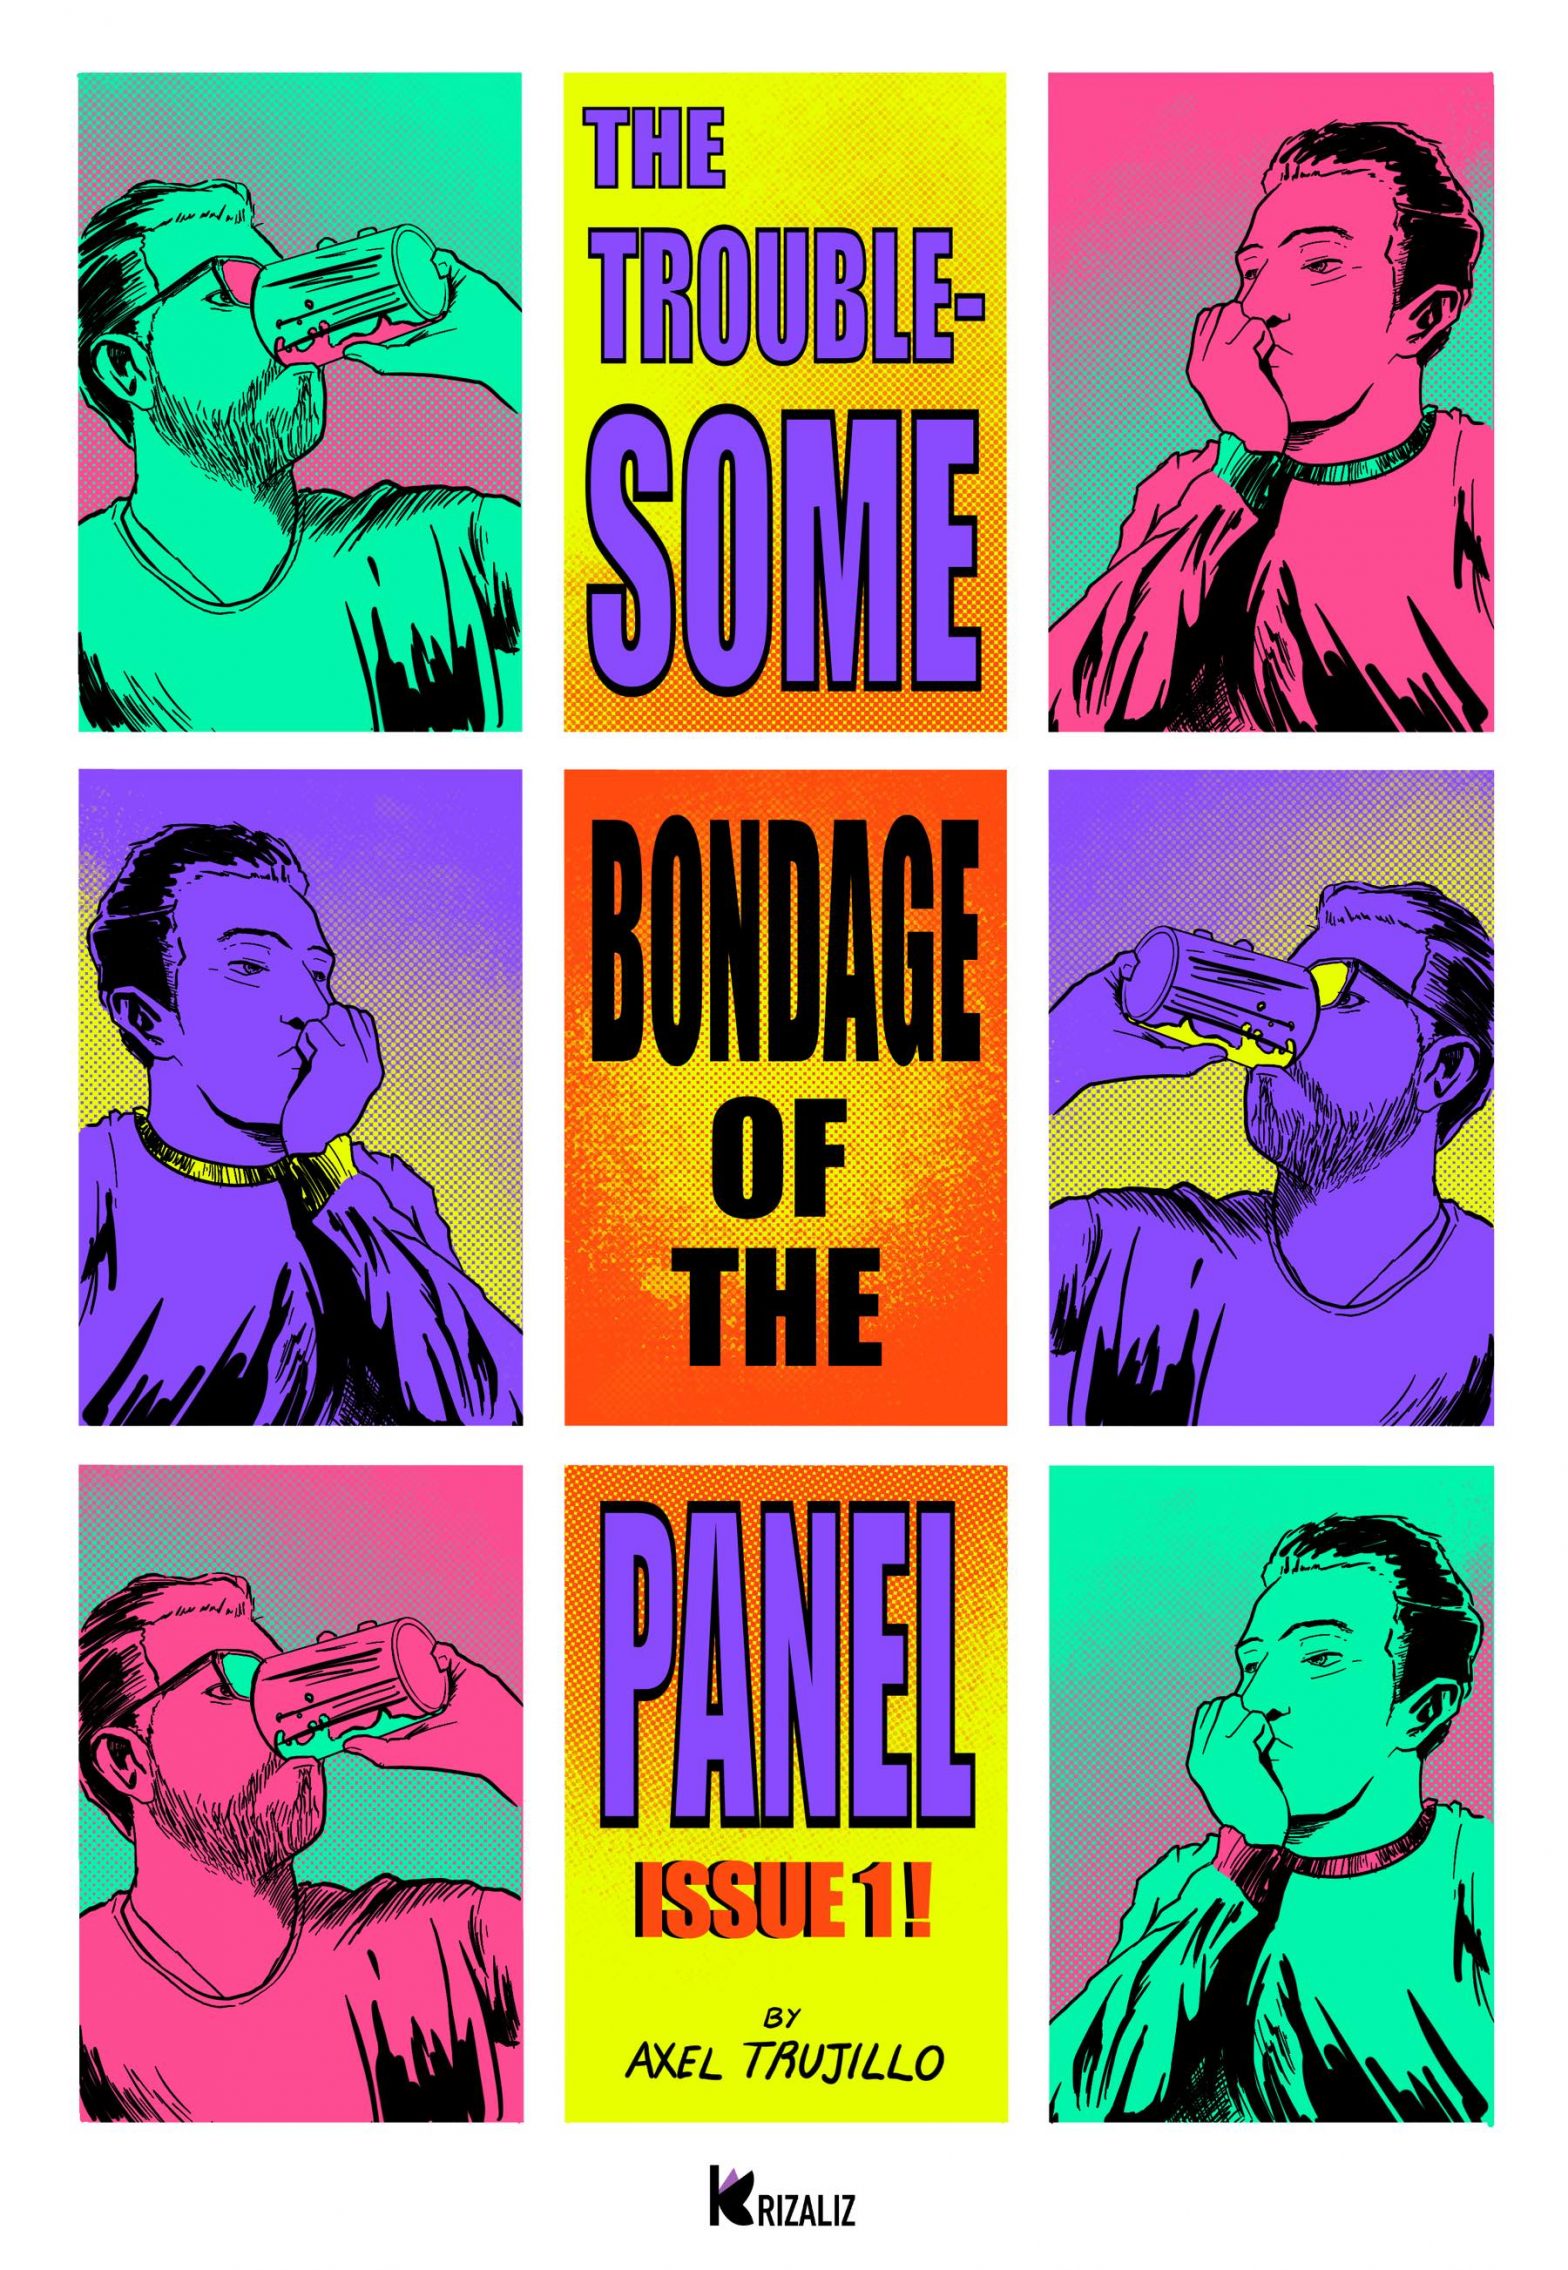 The troublesome bondage of the panel: ISSUE 1! (a short story about how sooner or later comics will break your heart)